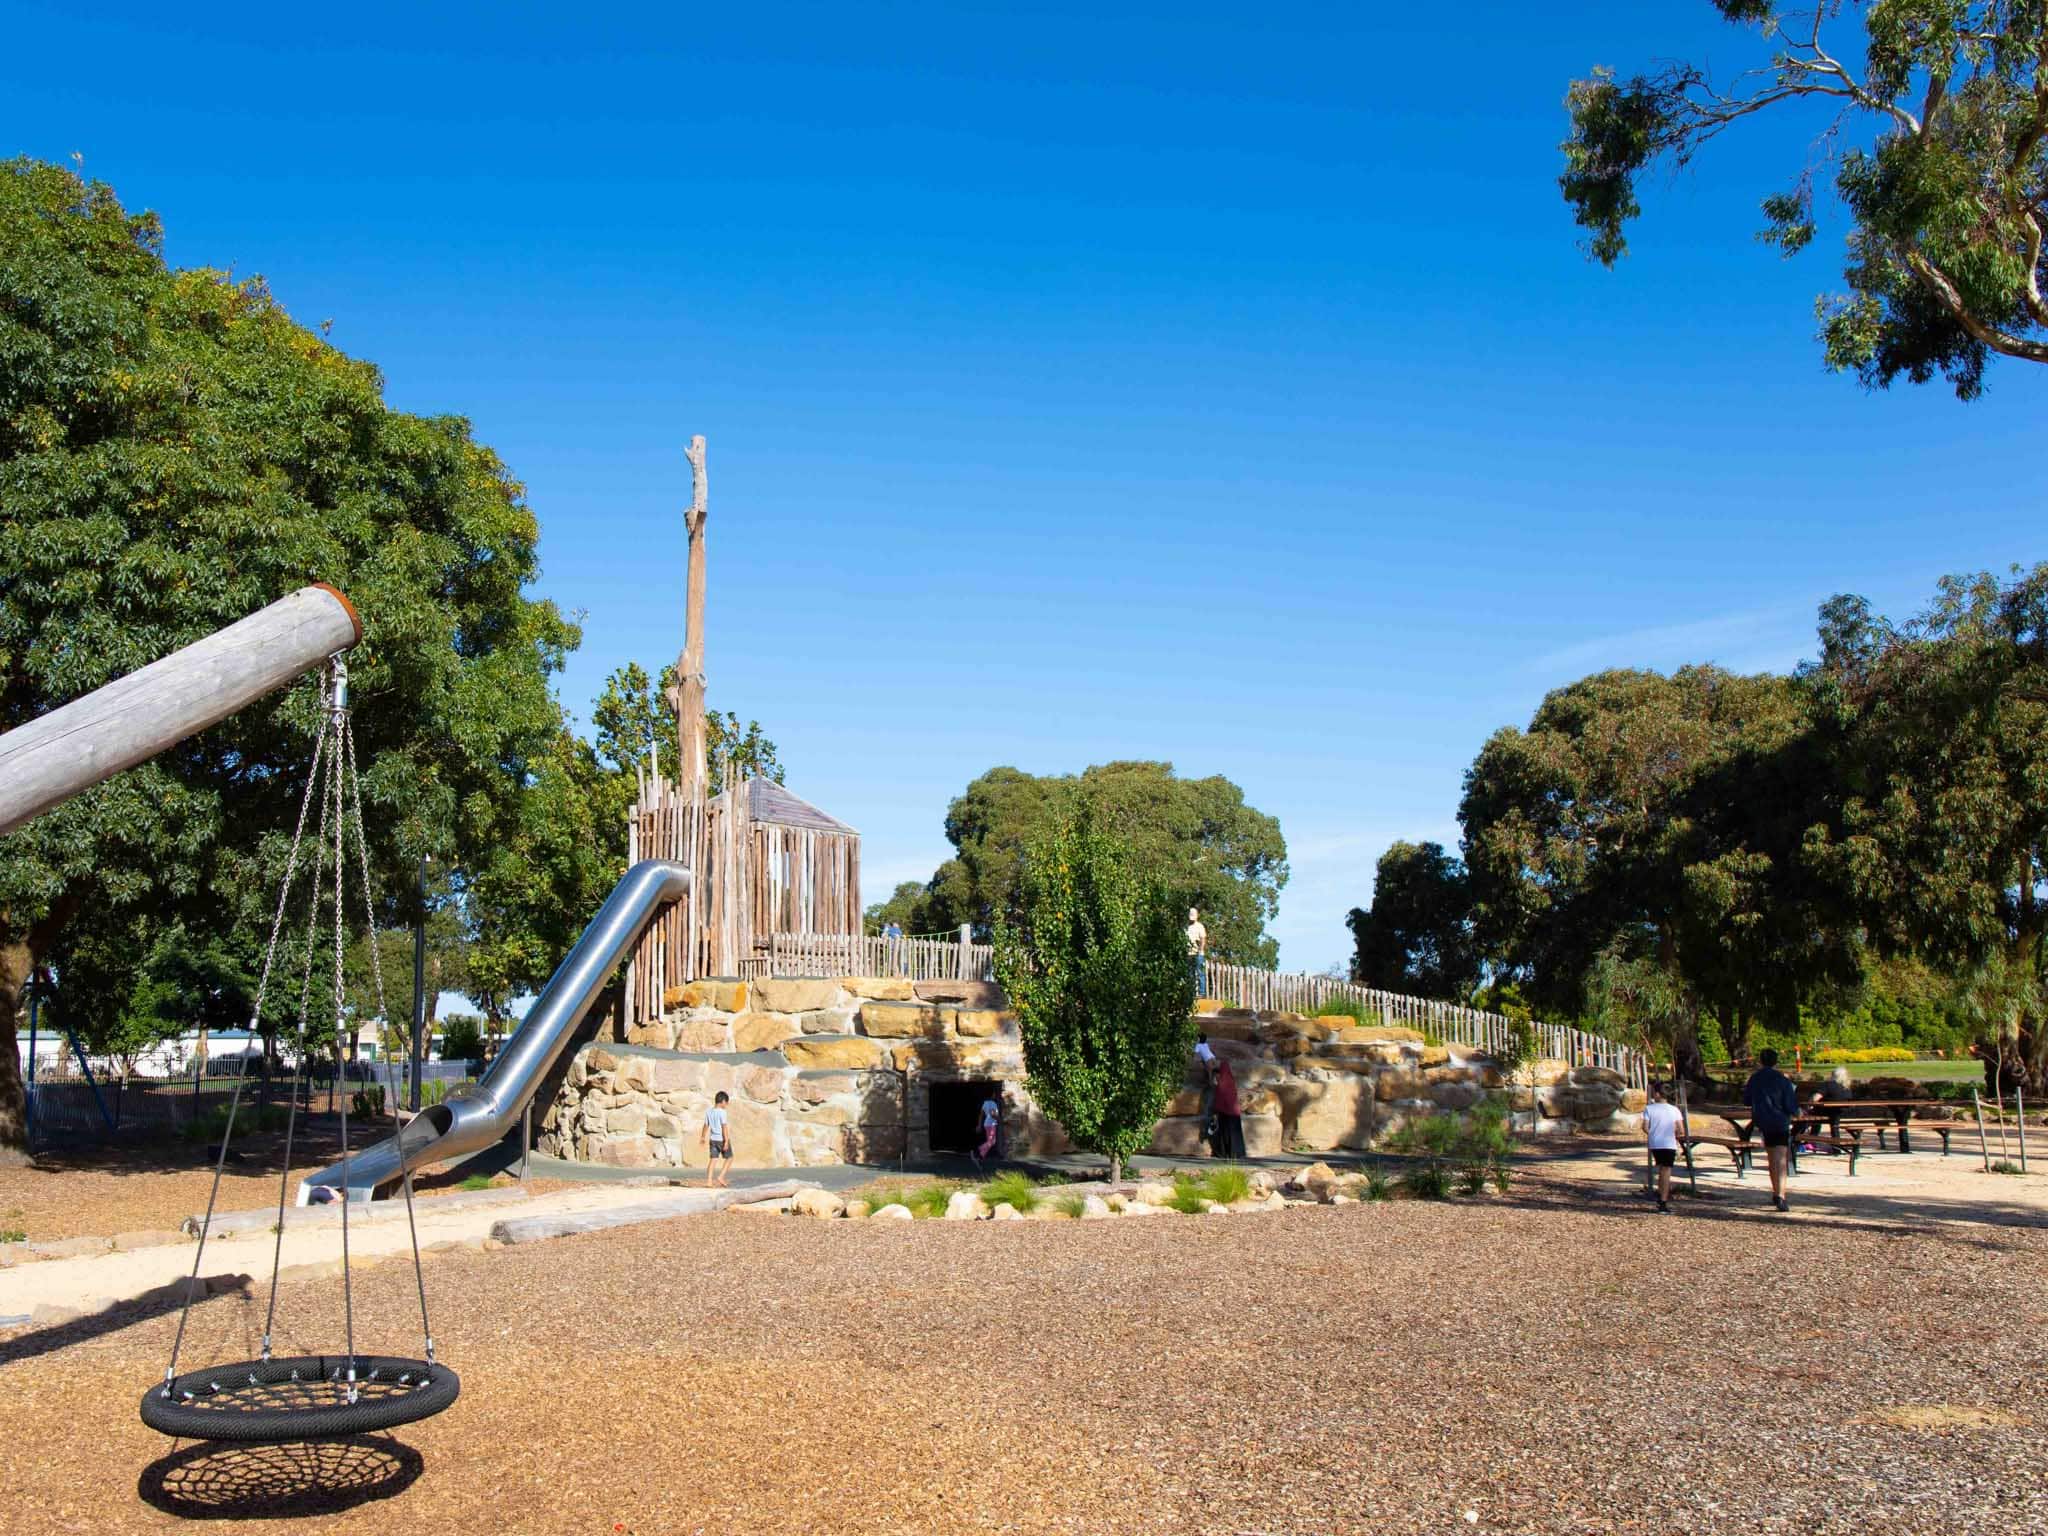 Millicent Nature Play In The Domain (Lachlan Swan Photography)